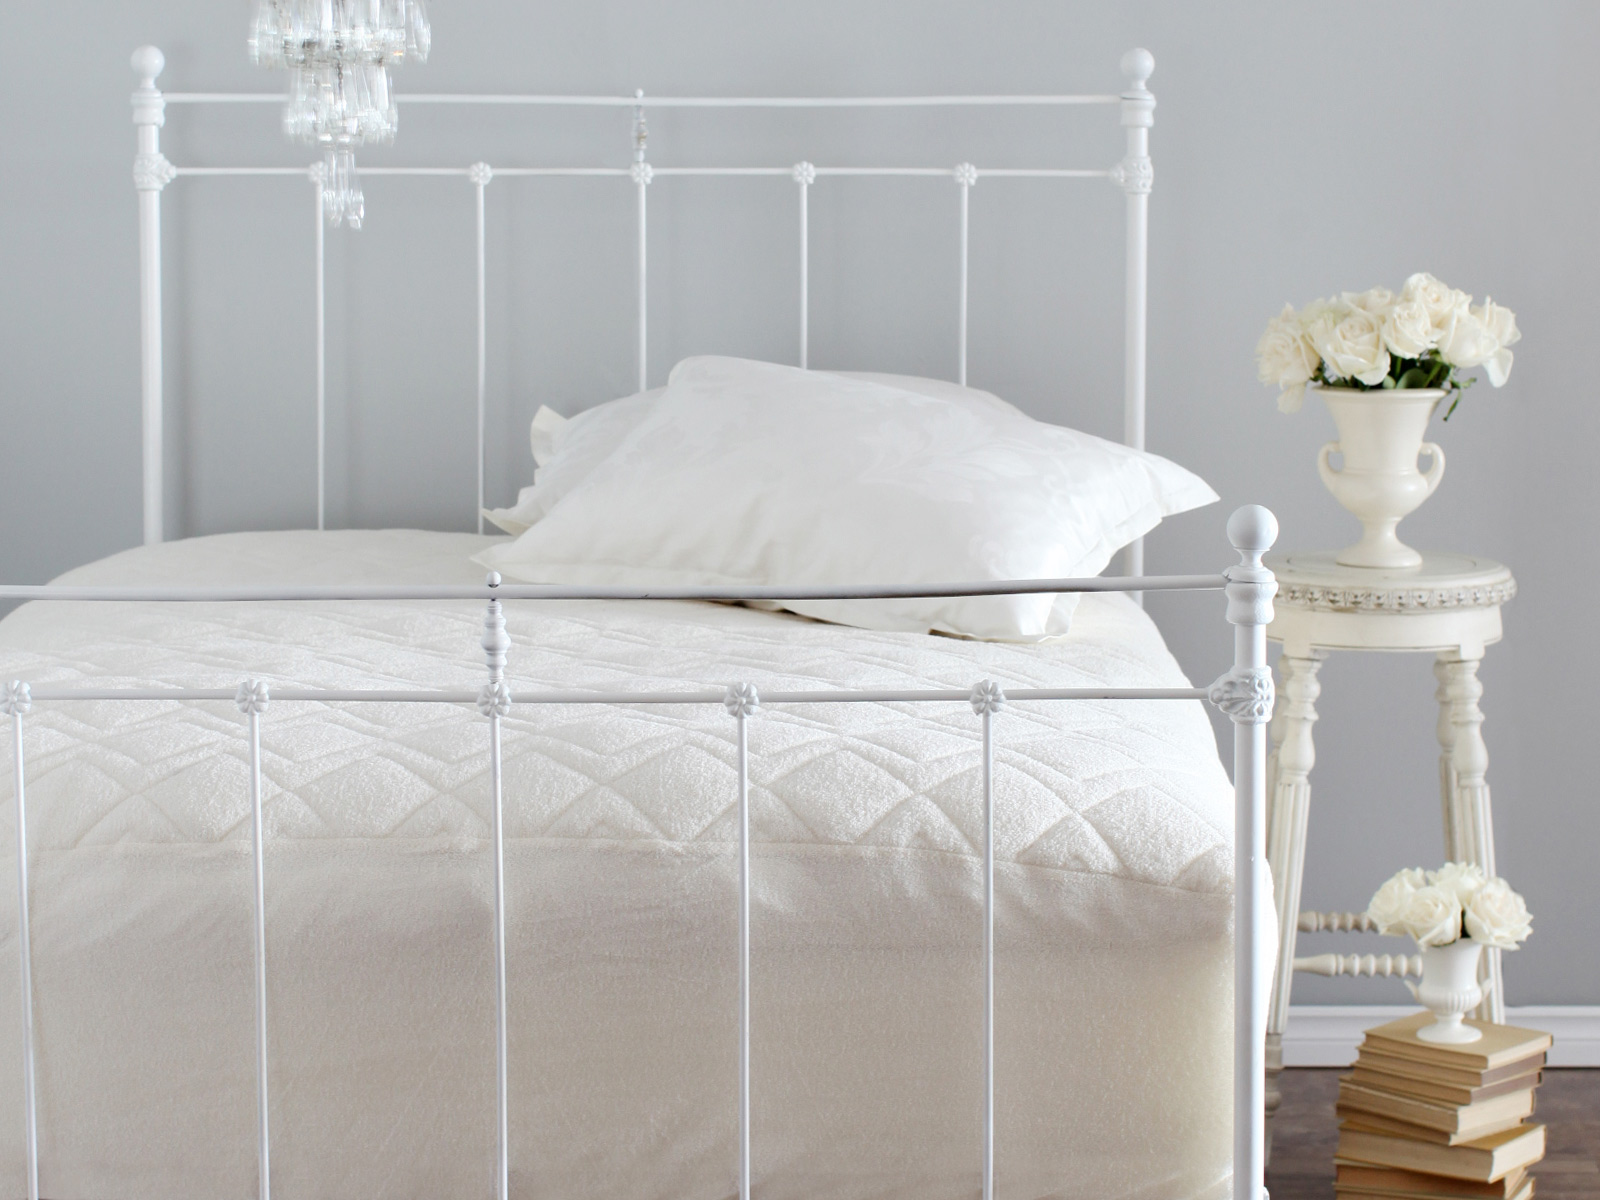 How to Keep Your Mattresses, Pillows, Duvets, and Featherbeds Clean